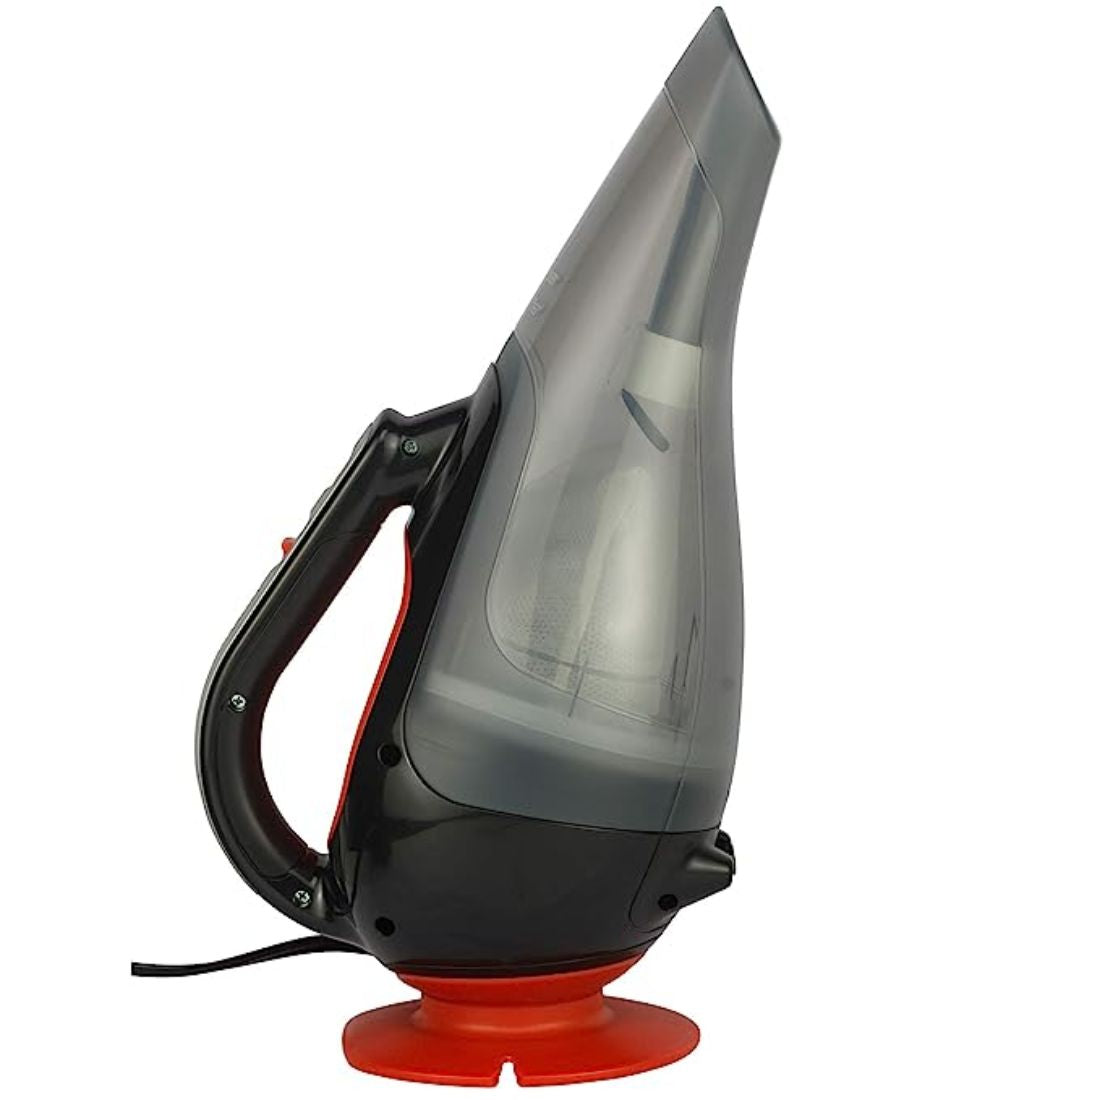 Black & Decker ADV1210 12V Powerful Dustbuster Automatic Car Vacuum Cleaner with 4 accessories